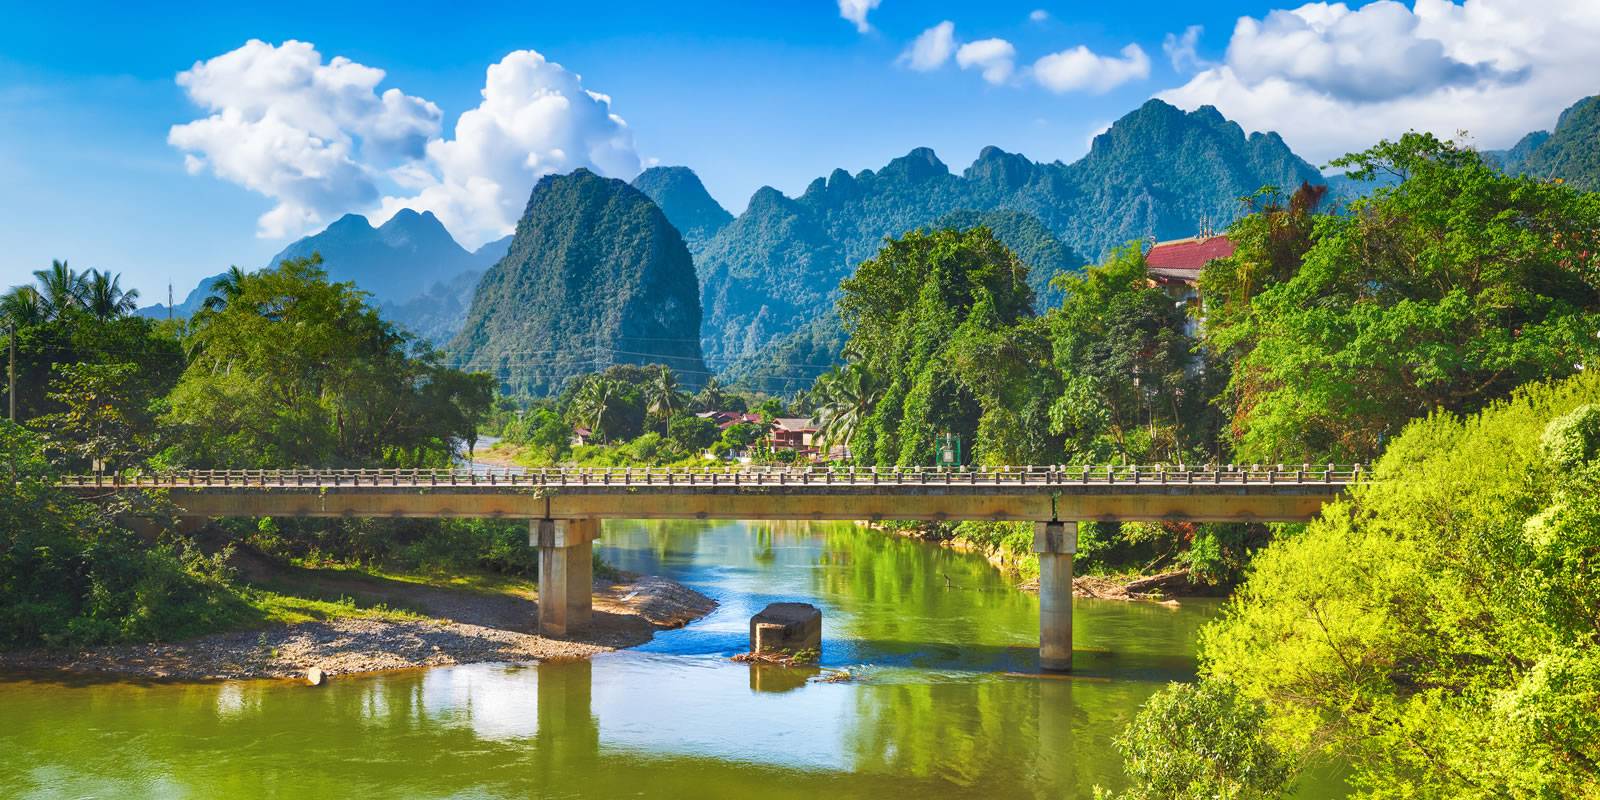 Laos Tours from United States of America (USA)